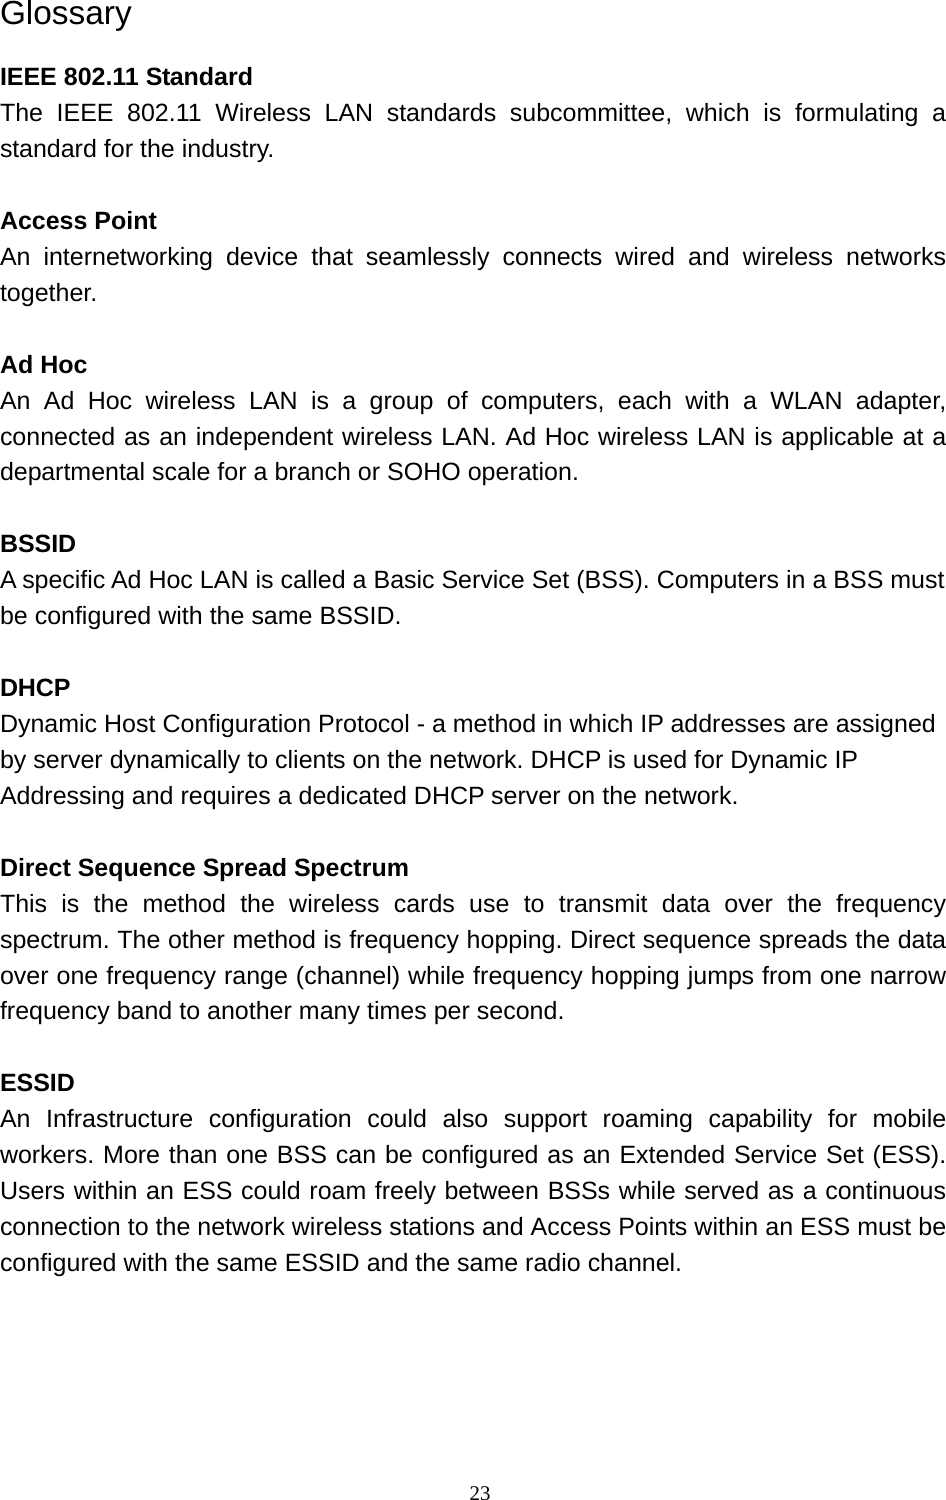   23 Glossary IEEE 802.11 Standard The IEEE 802.11 Wireless LAN standards subcommittee, which is formulating a standard for the industry.  Access Point An internetworking device that seamlessly connects wired and wireless networks together.  Ad Hoc   An Ad Hoc wireless LAN is a group of computers, each with a WLAN adapter, connected as an independent wireless LAN. Ad Hoc wireless LAN is applicable at a departmental scale for a branch or SOHO operation.  BSSID A specific Ad Hoc LAN is called a Basic Service Set (BSS). Computers in a BSS must be configured with the same BSSID.  DHCP Dynamic Host Configuration Protocol - a method in which IP addresses are assigned by server dynamically to clients on the network. DHCP is used for Dynamic IP Addressing and requires a dedicated DHCP server on the network.  Direct Sequence Spread Spectrum This is the method the wireless cards use to transmit data over the frequency spectrum. The other method is frequency hopping. Direct sequence spreads the data over one frequency range (channel) while frequency hopping jumps from one narrow frequency band to another many times per second.  ESSID An Infrastructure configuration could also support roaming capability for mobile workers. More than one BSS can be configured as an Extended Service Set (ESS). Users within an ESS could roam freely between BSSs while served as a continuous connection to the network wireless stations and Access Points within an ESS must be configured with the same ESSID and the same radio channel.    